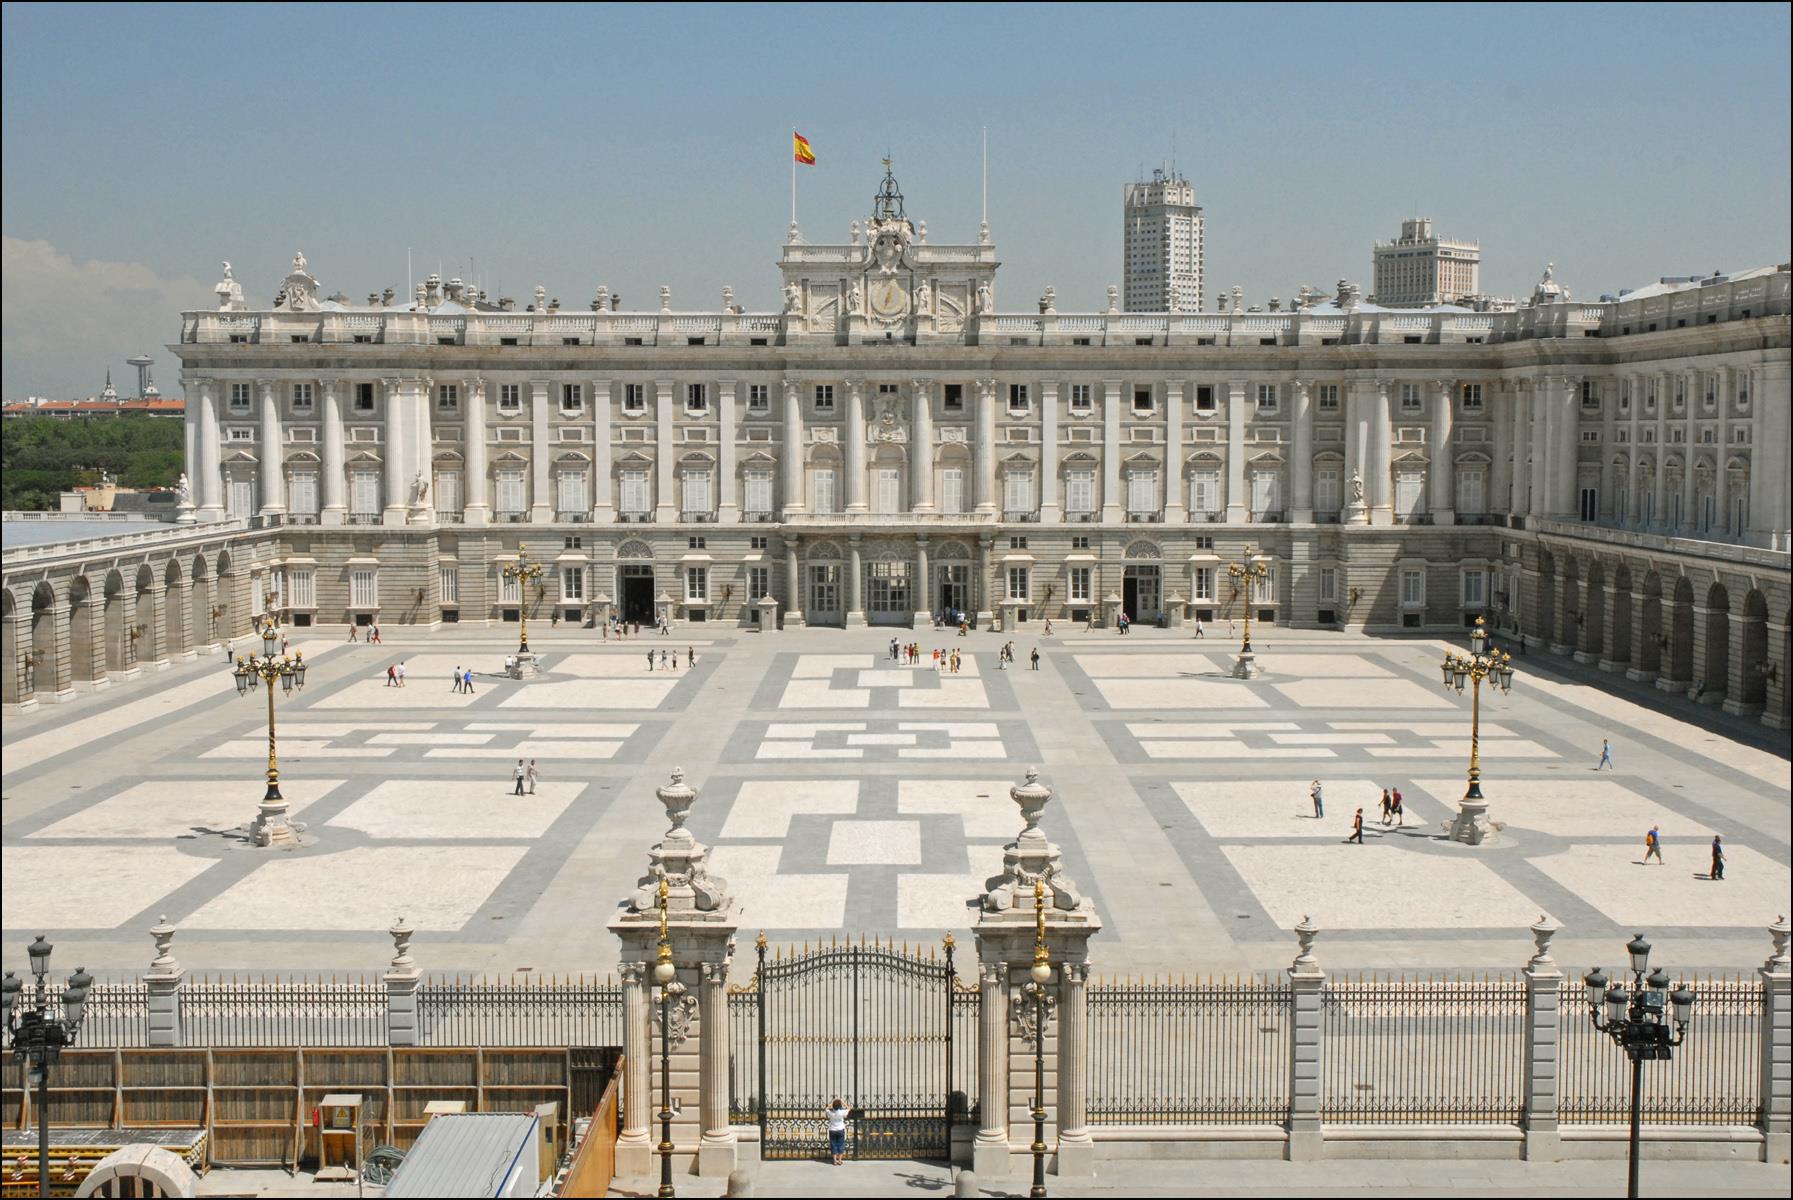 Guided visit of the Royal Palace of Madrid